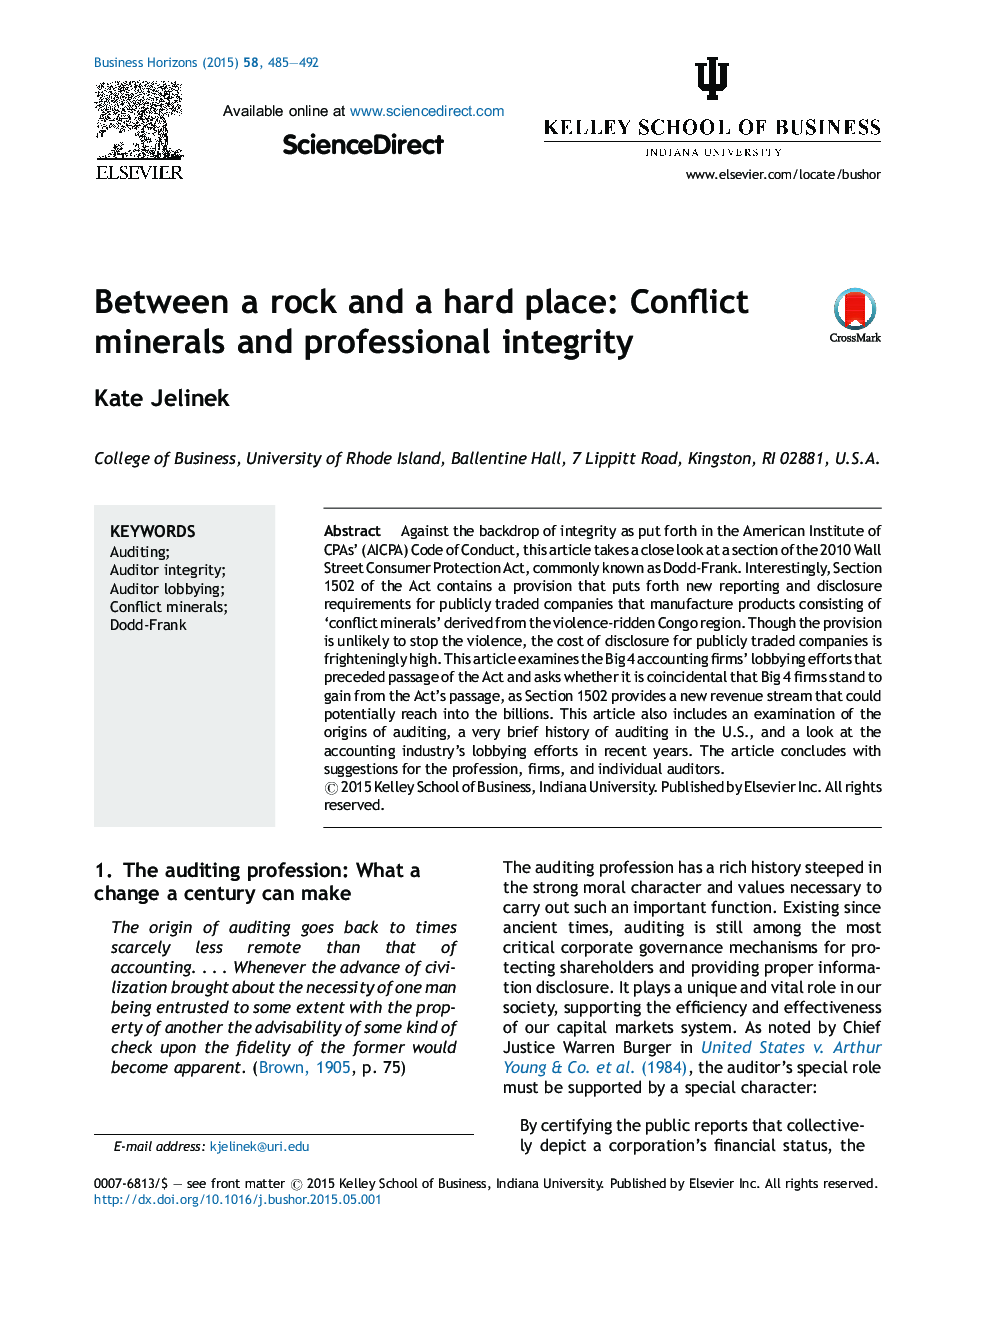 Between a rock and a hard place: Conflict minerals and professional integrity